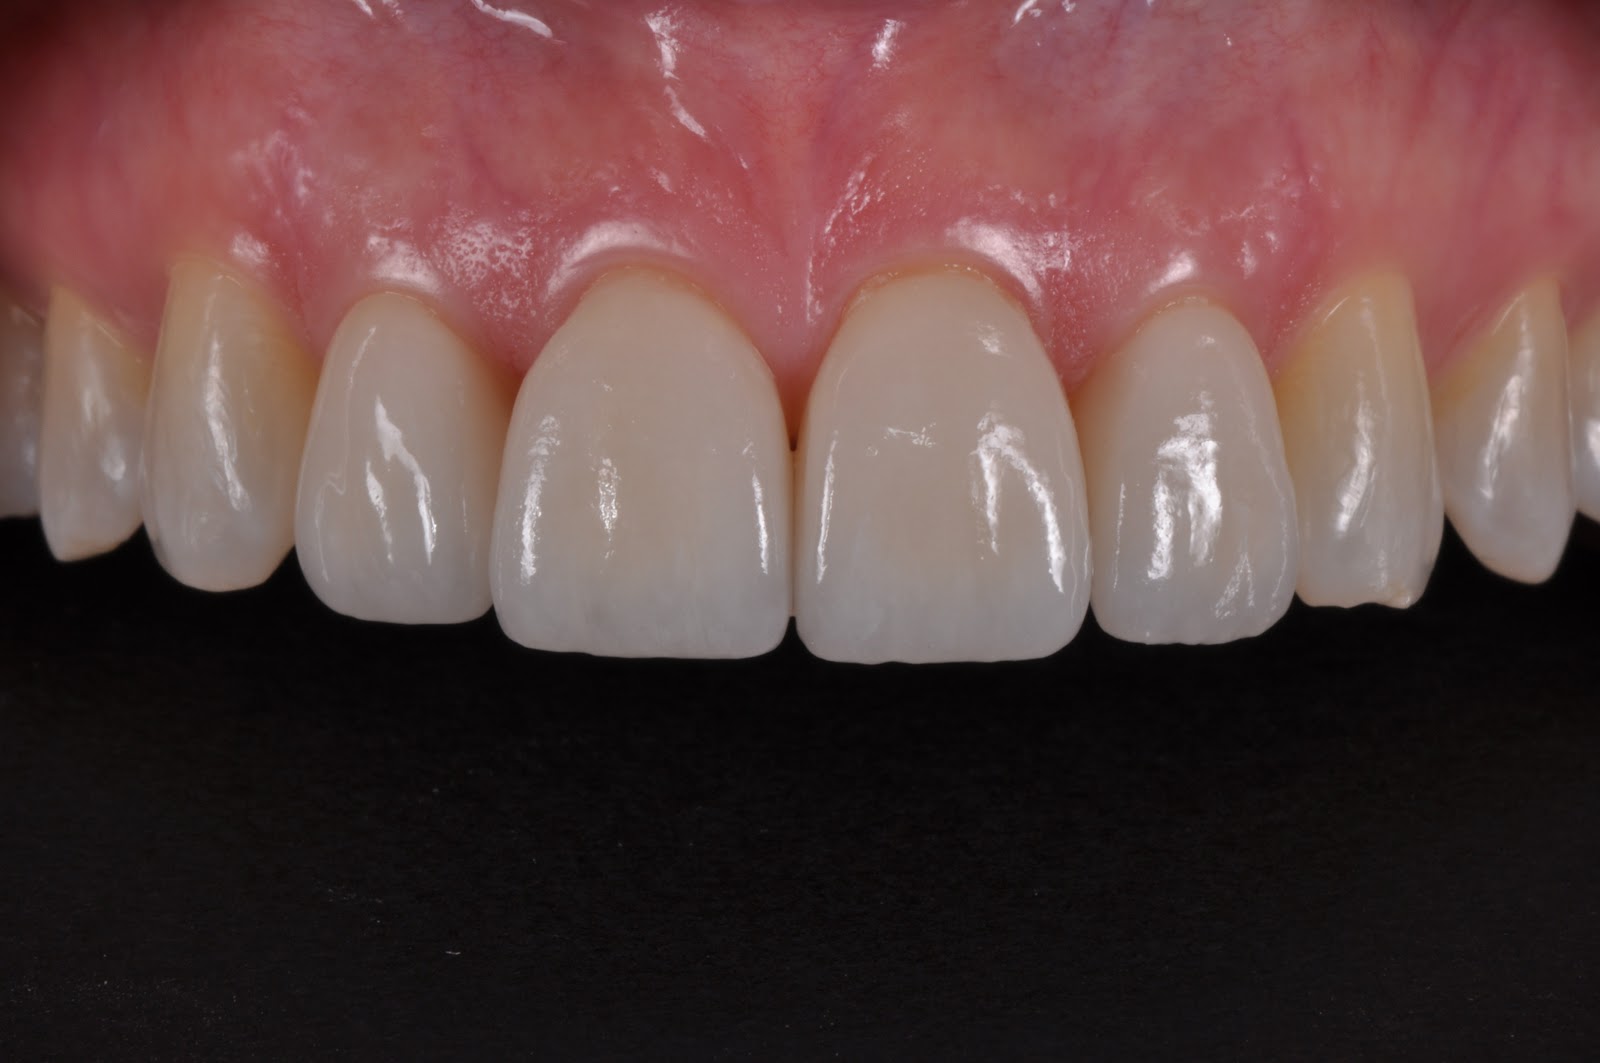 Dental Photography Pearls For Better Images Instantly: An easy (and  inexpensive) way to get black backgrounds for esthetic dental images